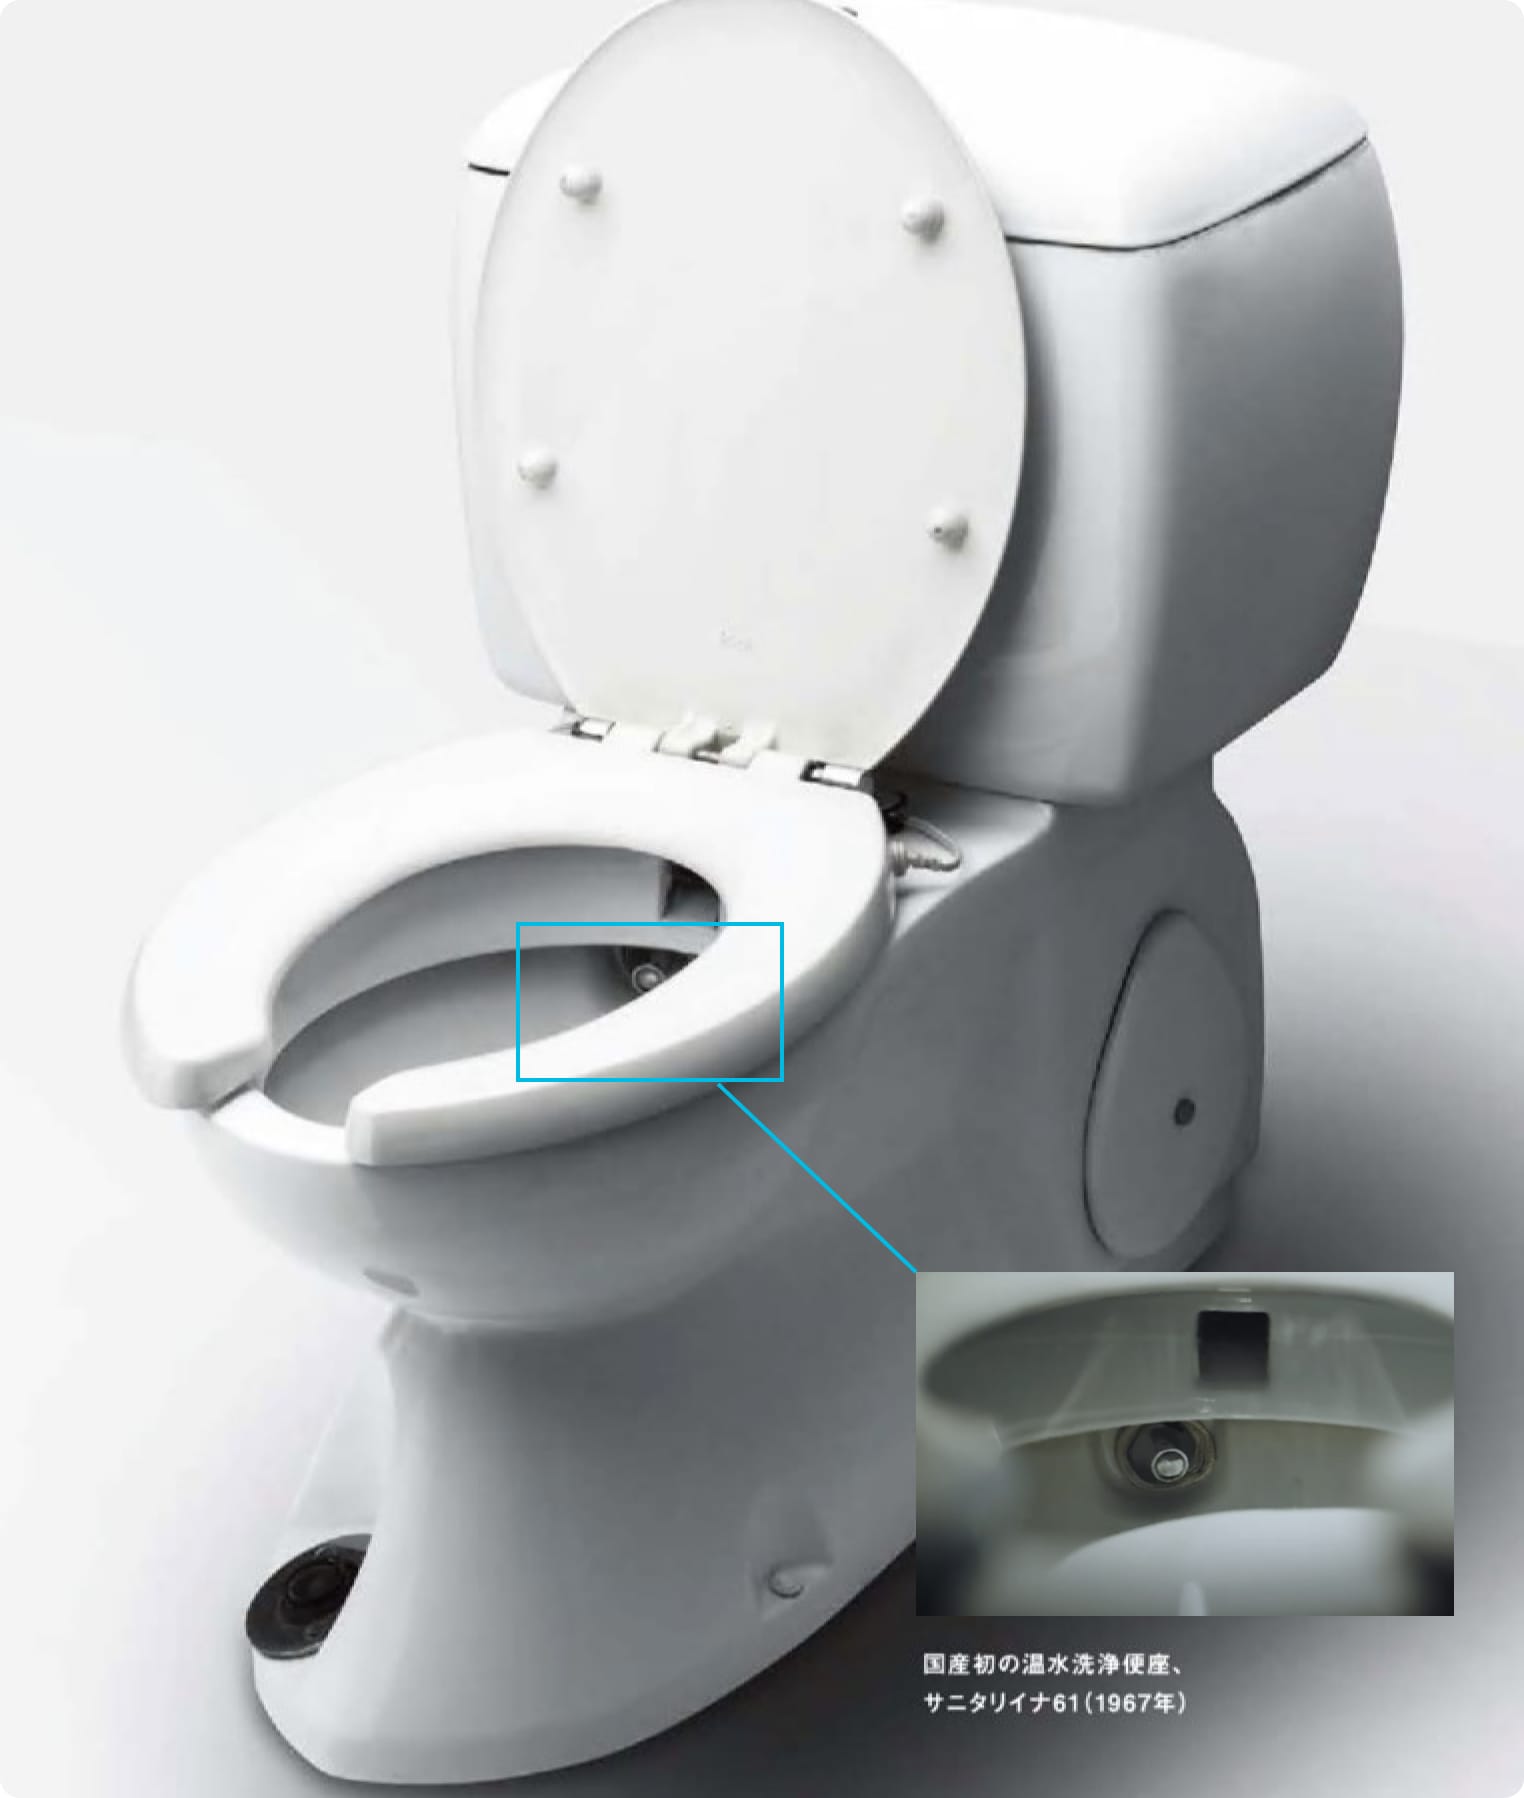 UNVEILING NEW JOY AND COMFORT WITH JAPAN’S FIRST SHOWER TOILET